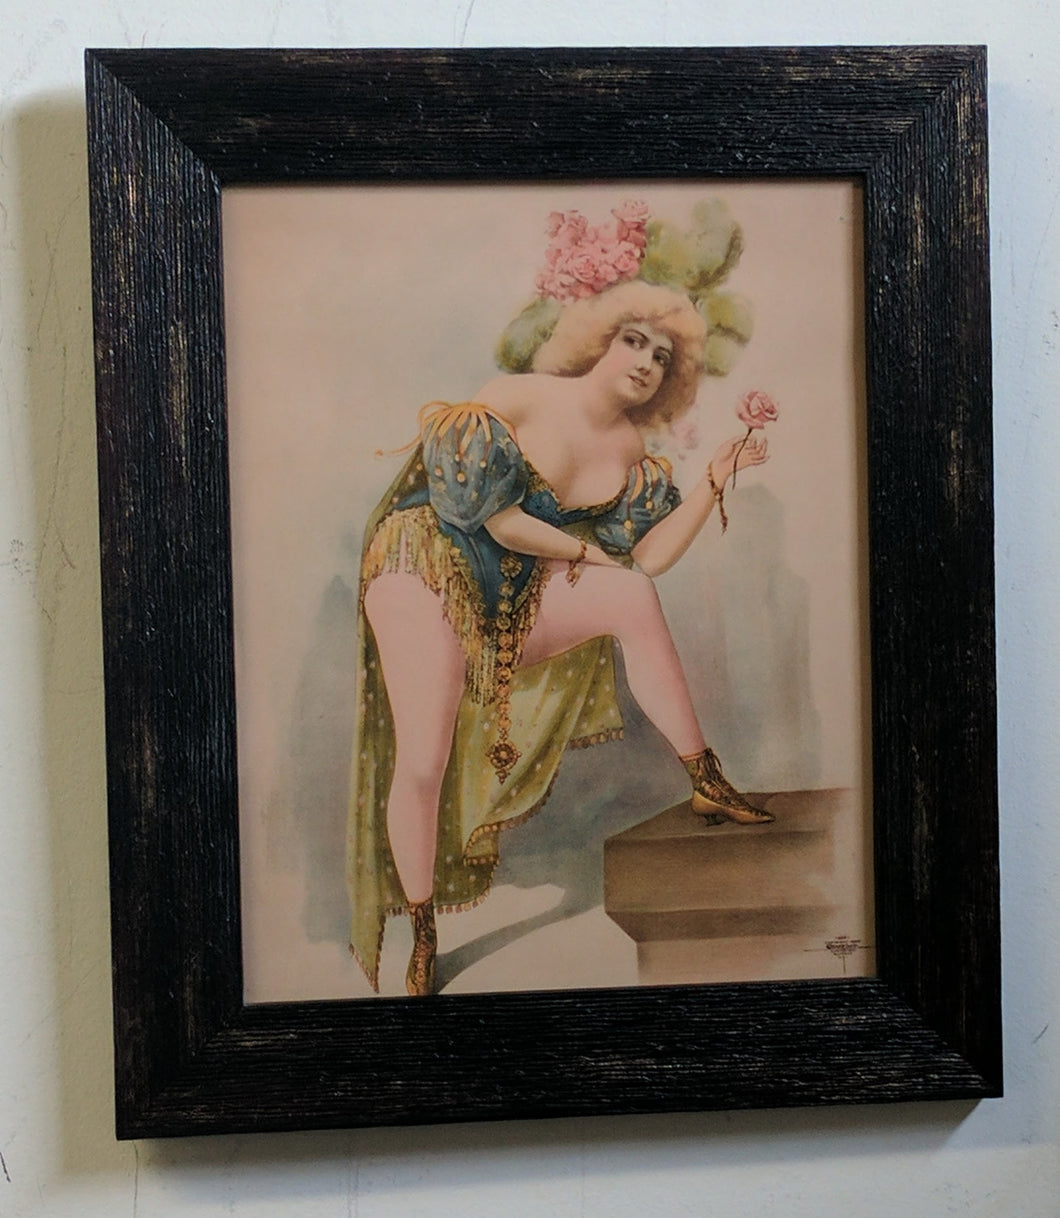 5148 Vintage Lithograph of a Stage Actress Distressed